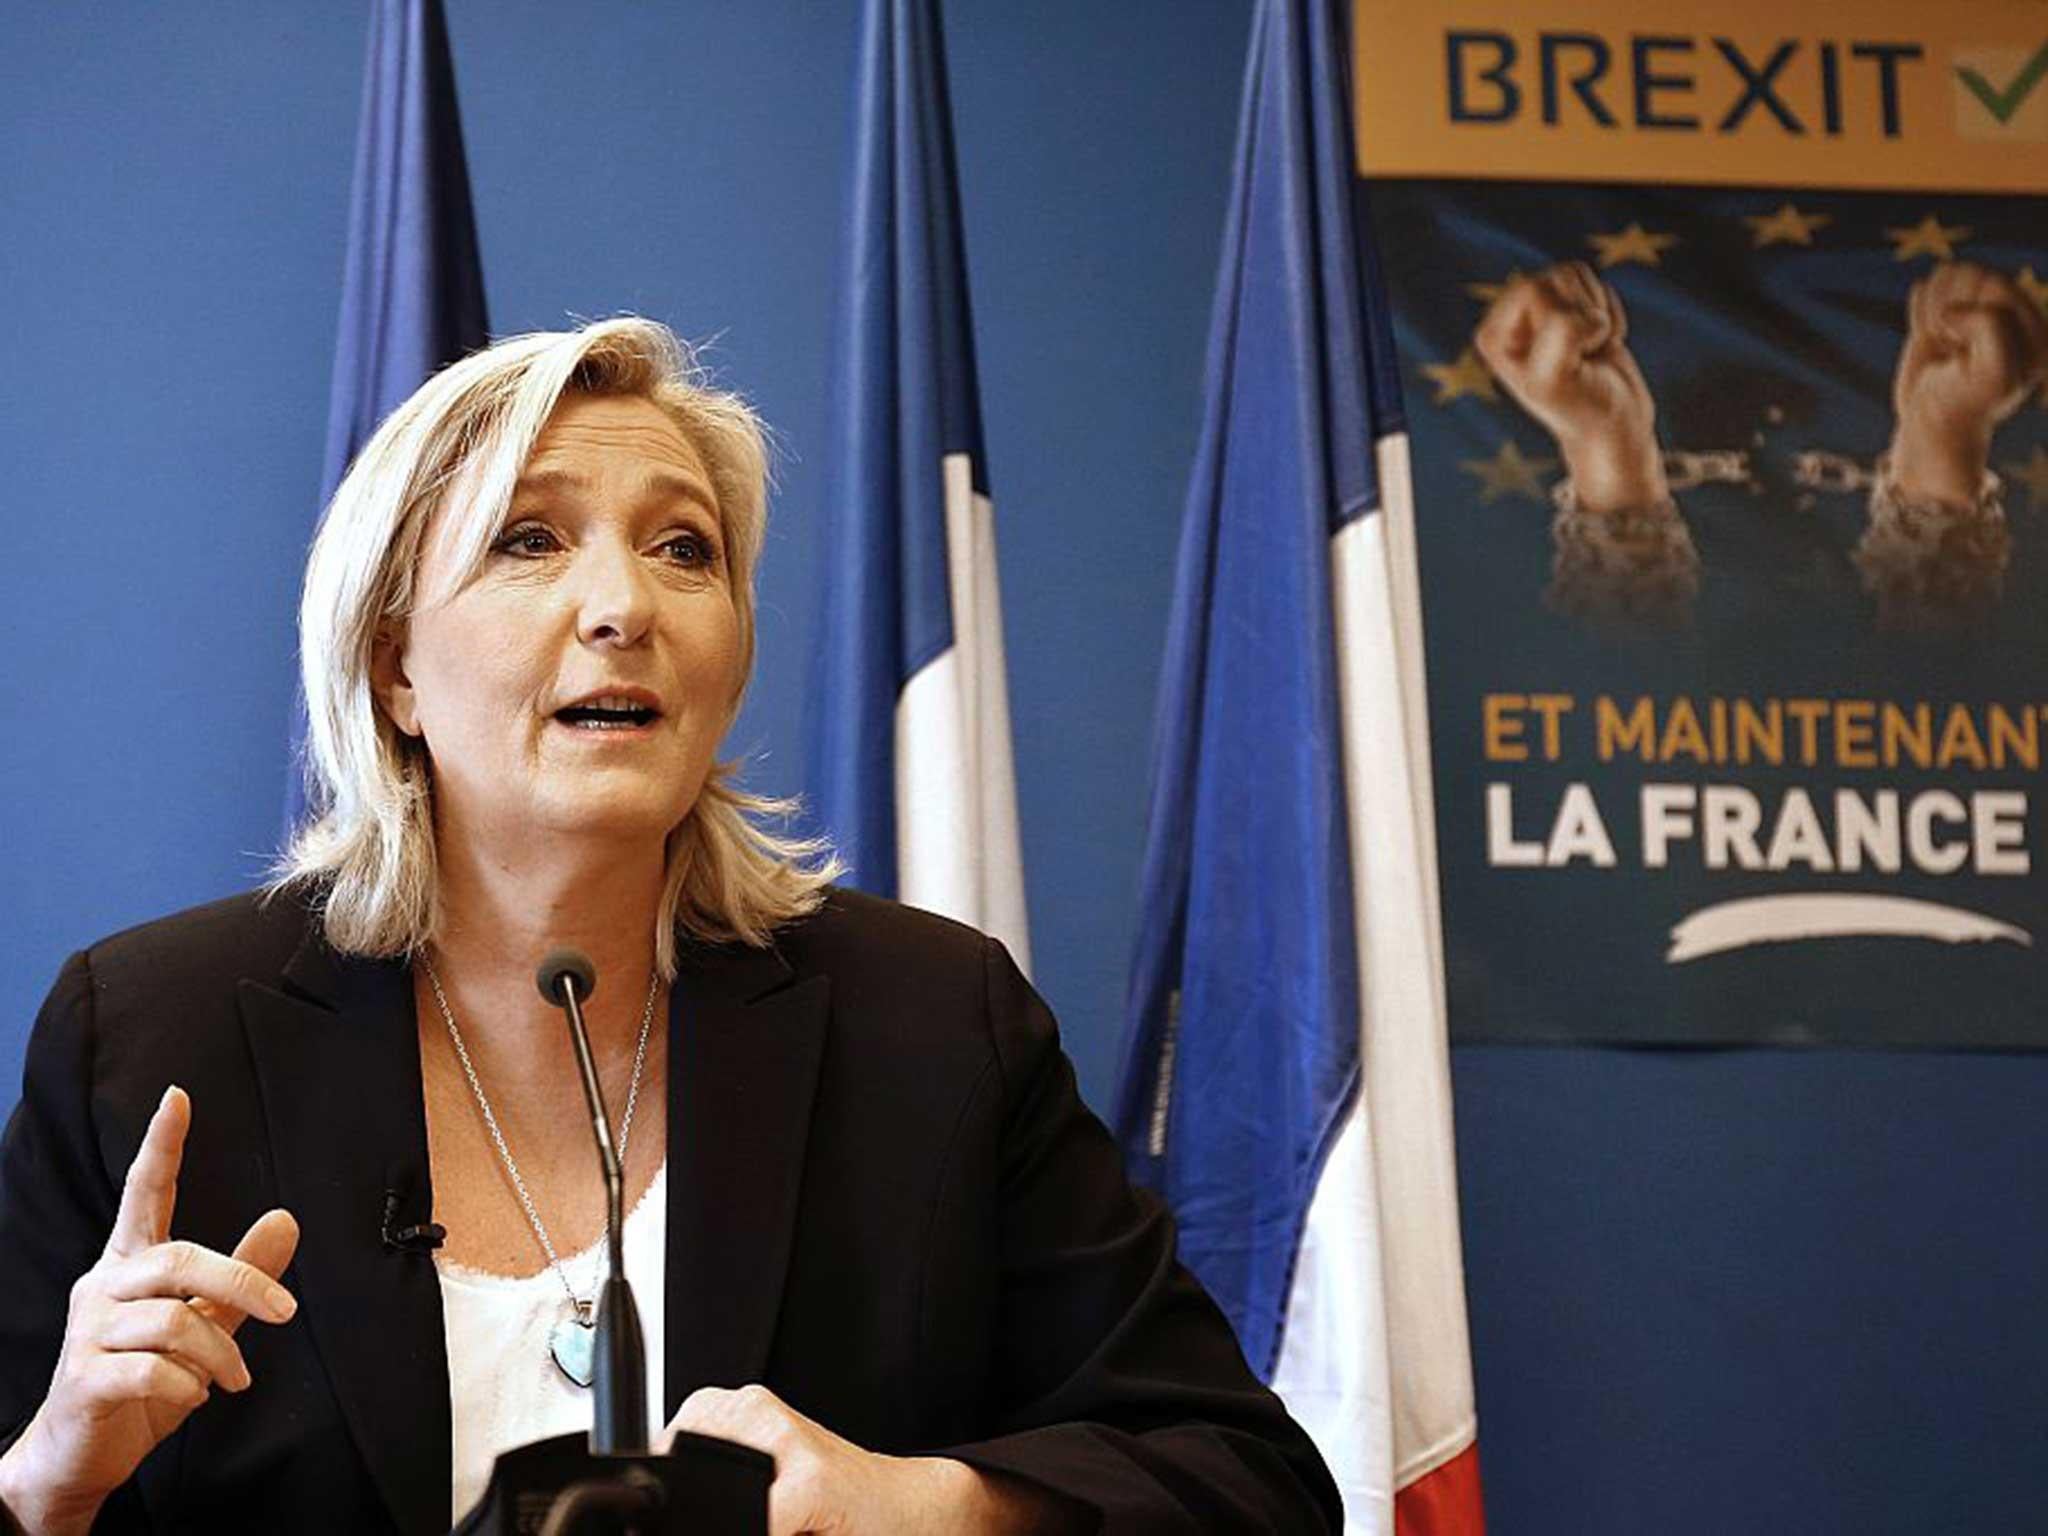 Ms Le Pen recently announced a softened stance on Europe and the Euro in a suspected bid to gain more centre ground